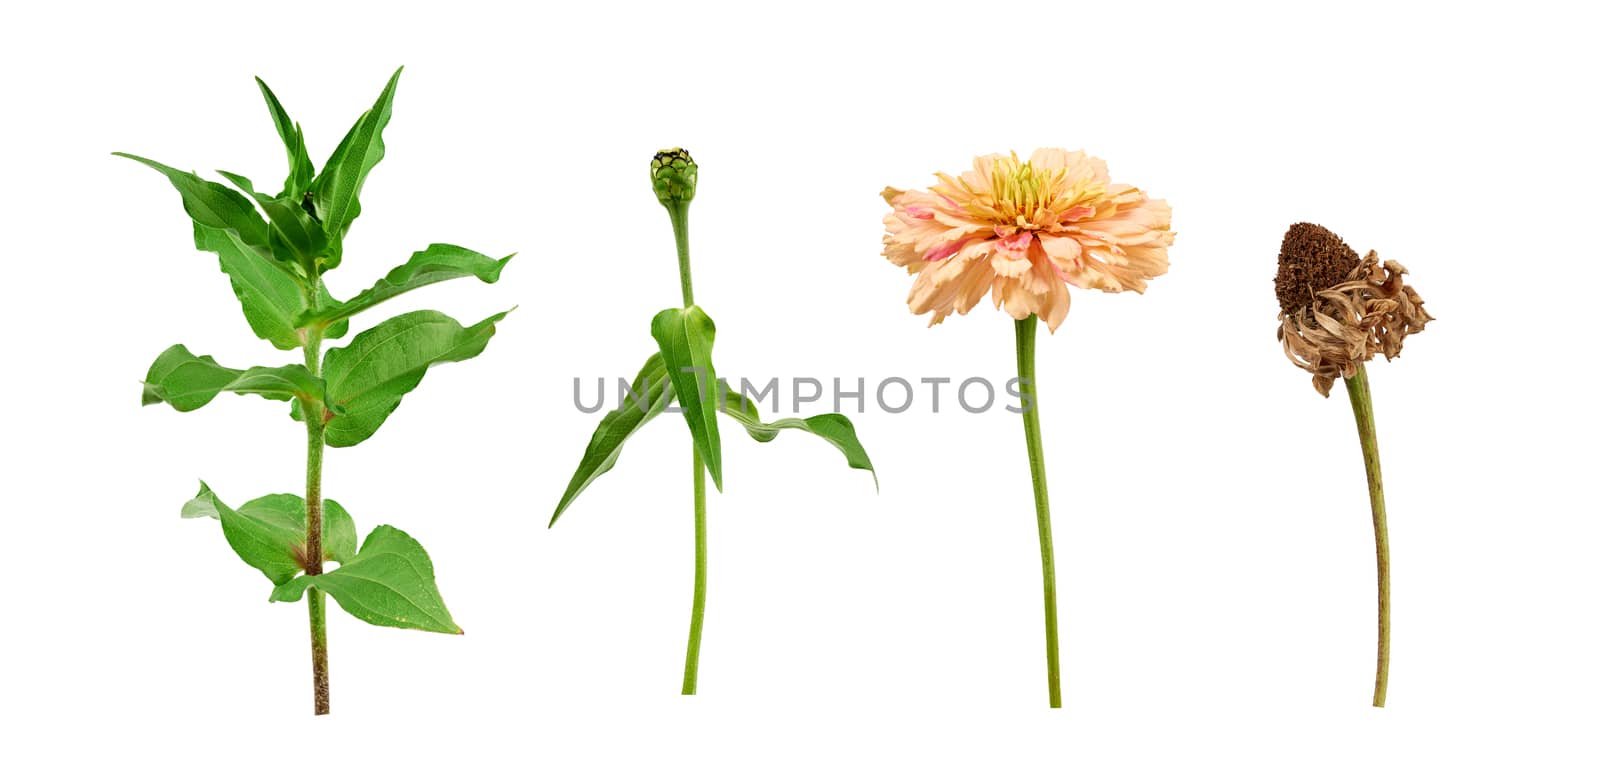 zinnia flower stalk with green leaves, flowering and wilted bud isolated on white background, close up, plant cycle